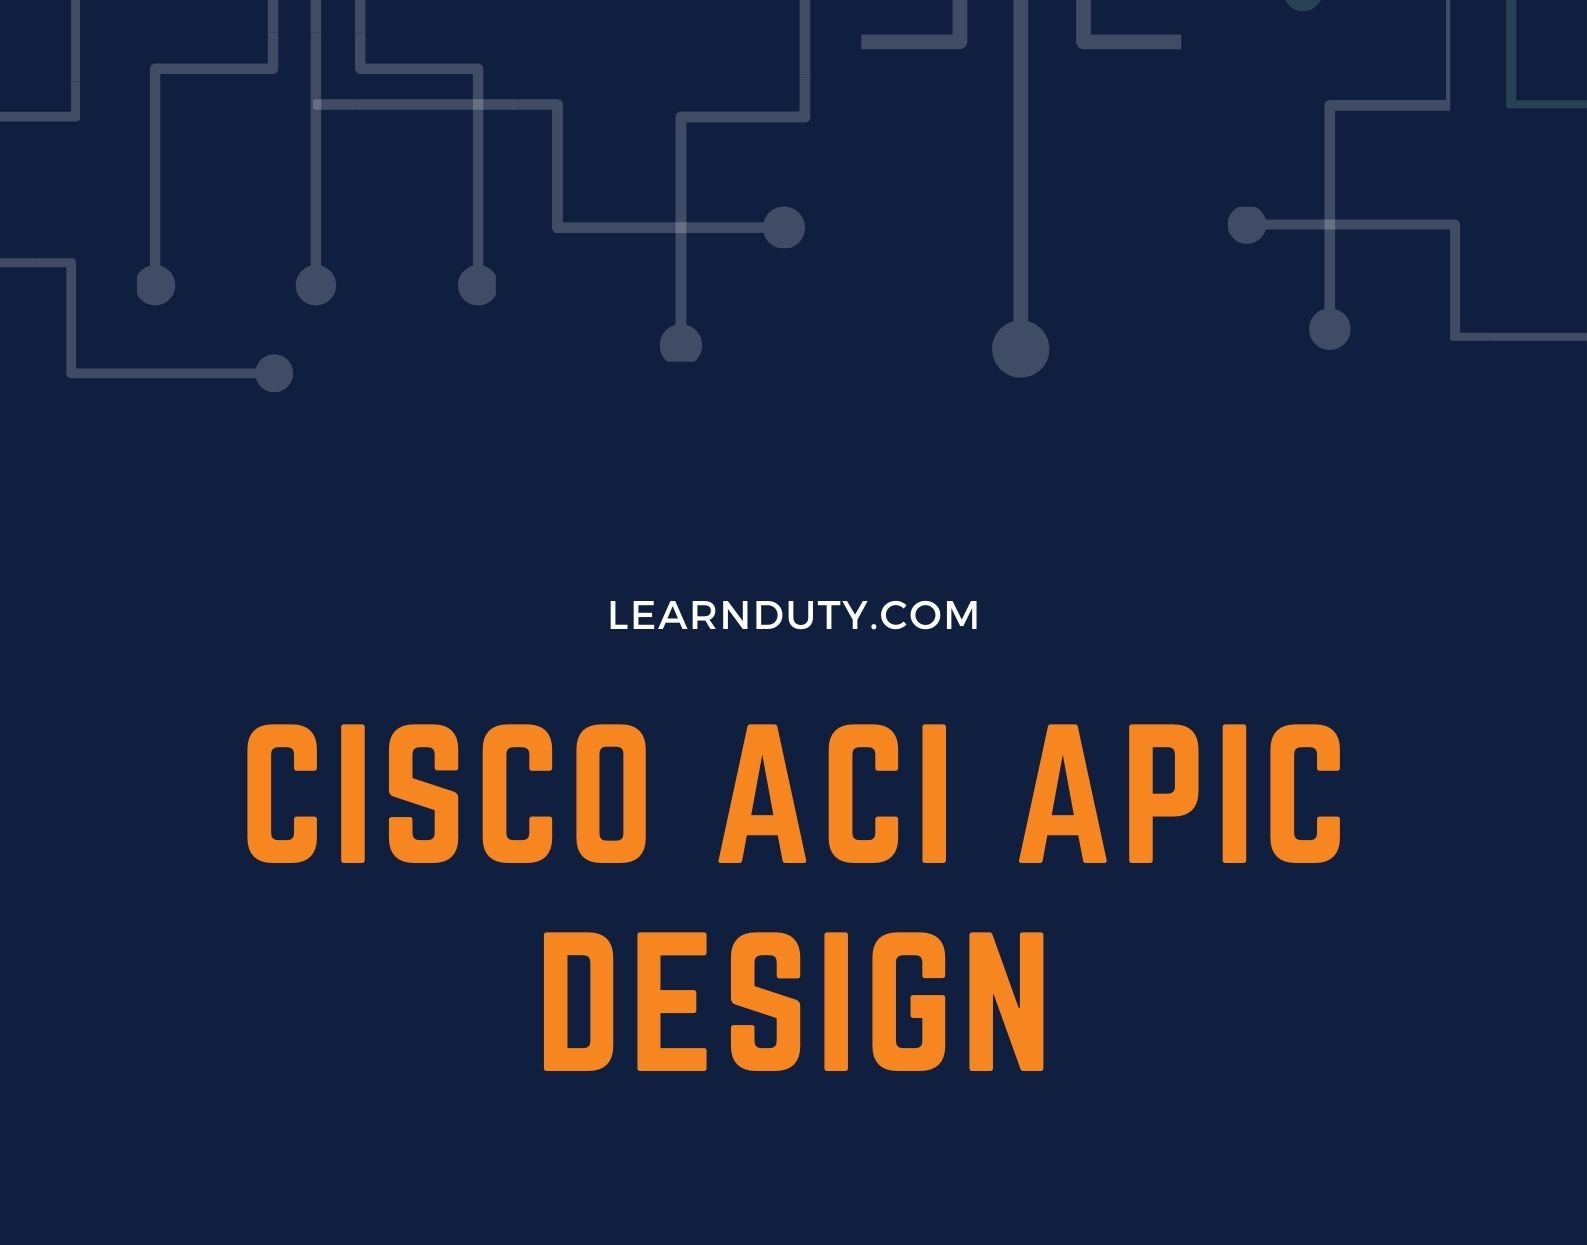 Cisco APIC Appliance features and design